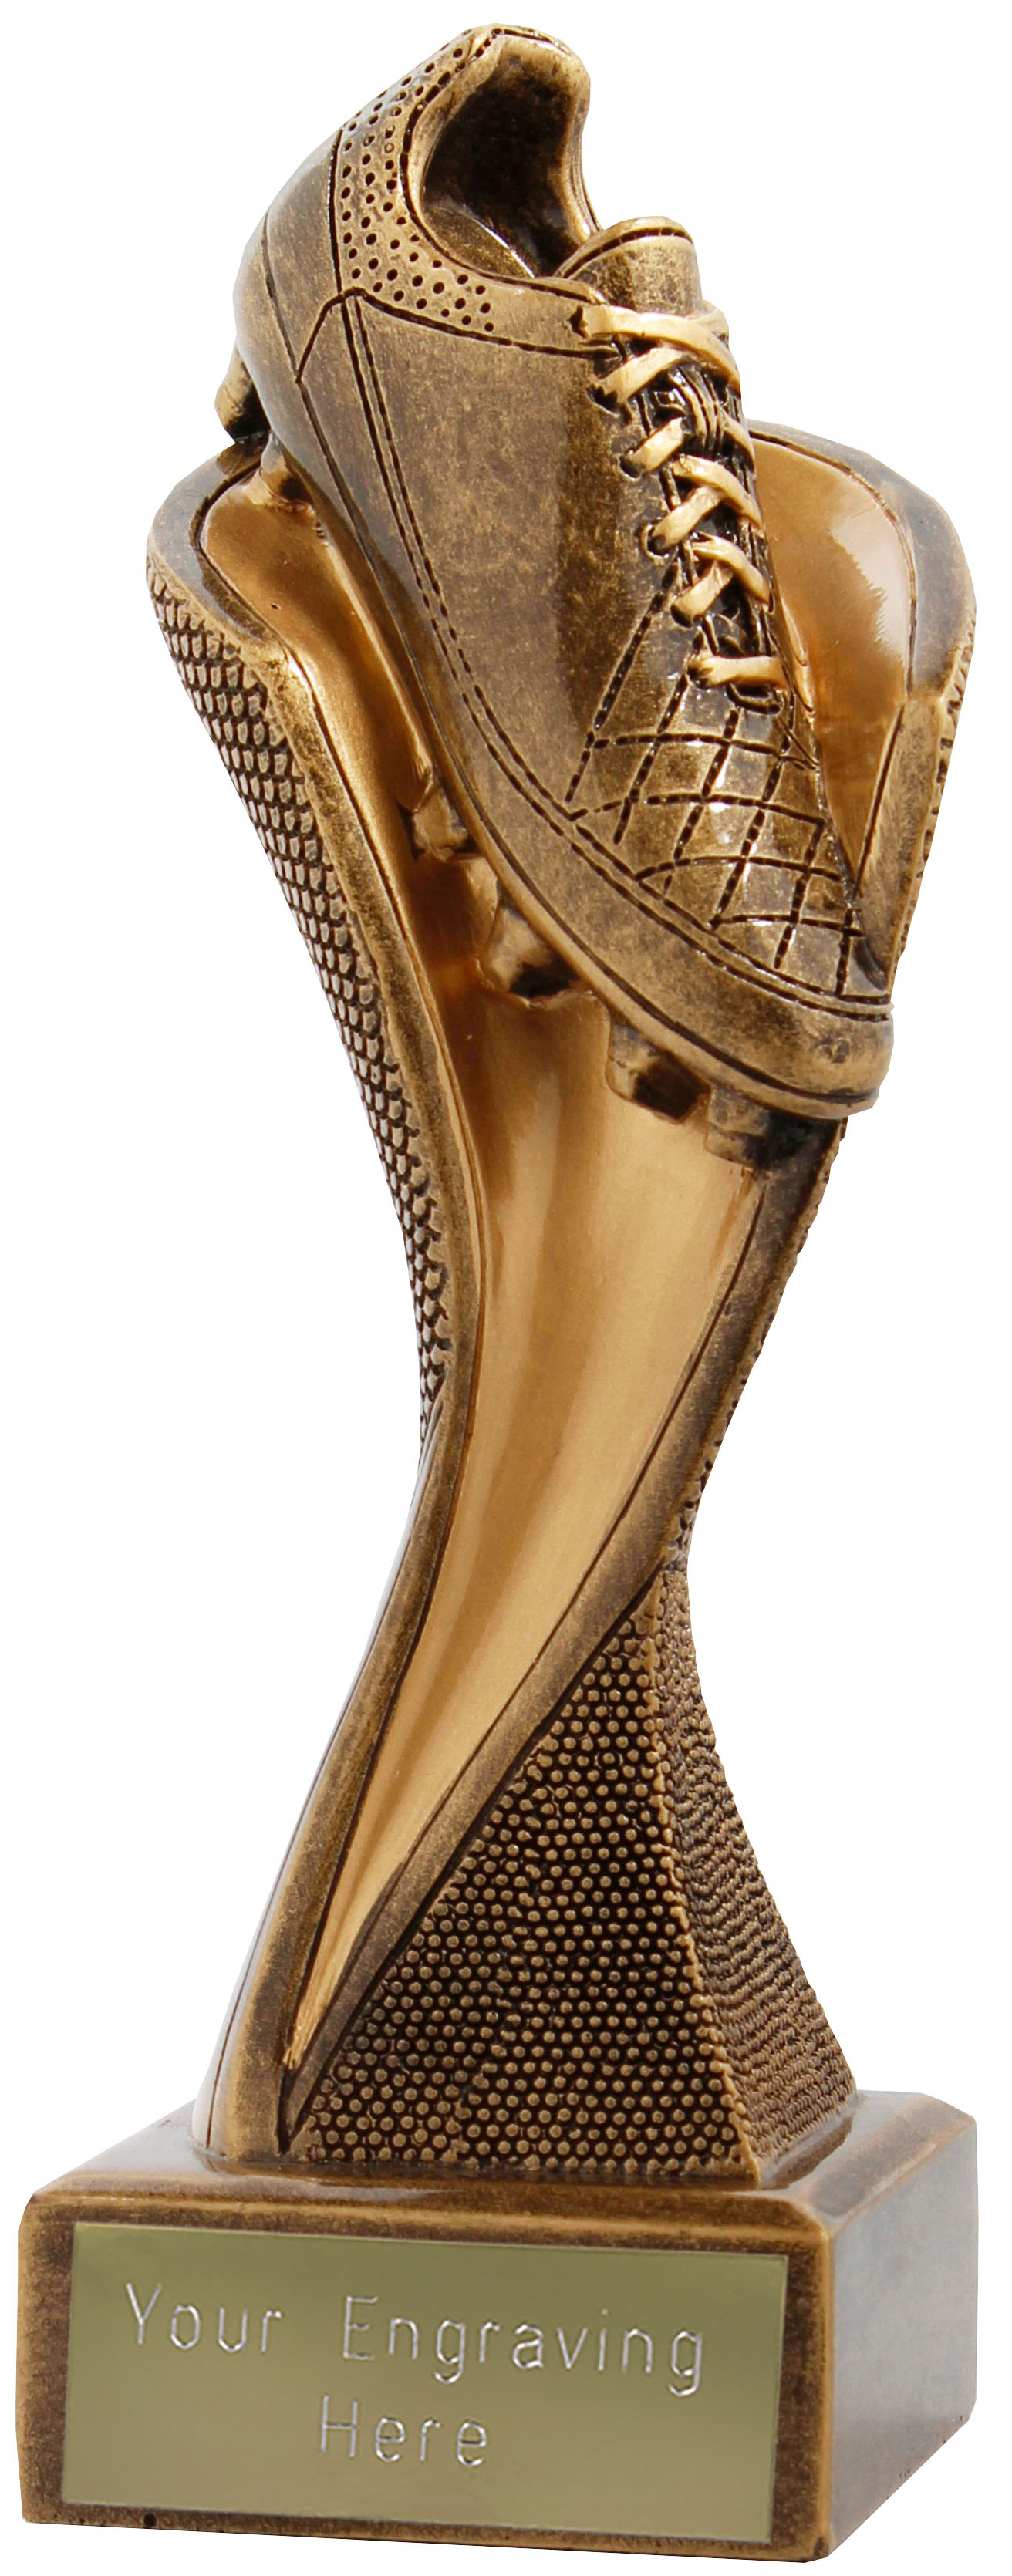 Football Trophies - Football Boot Groove Trophy Antique Gold 14.5cm (5.75")